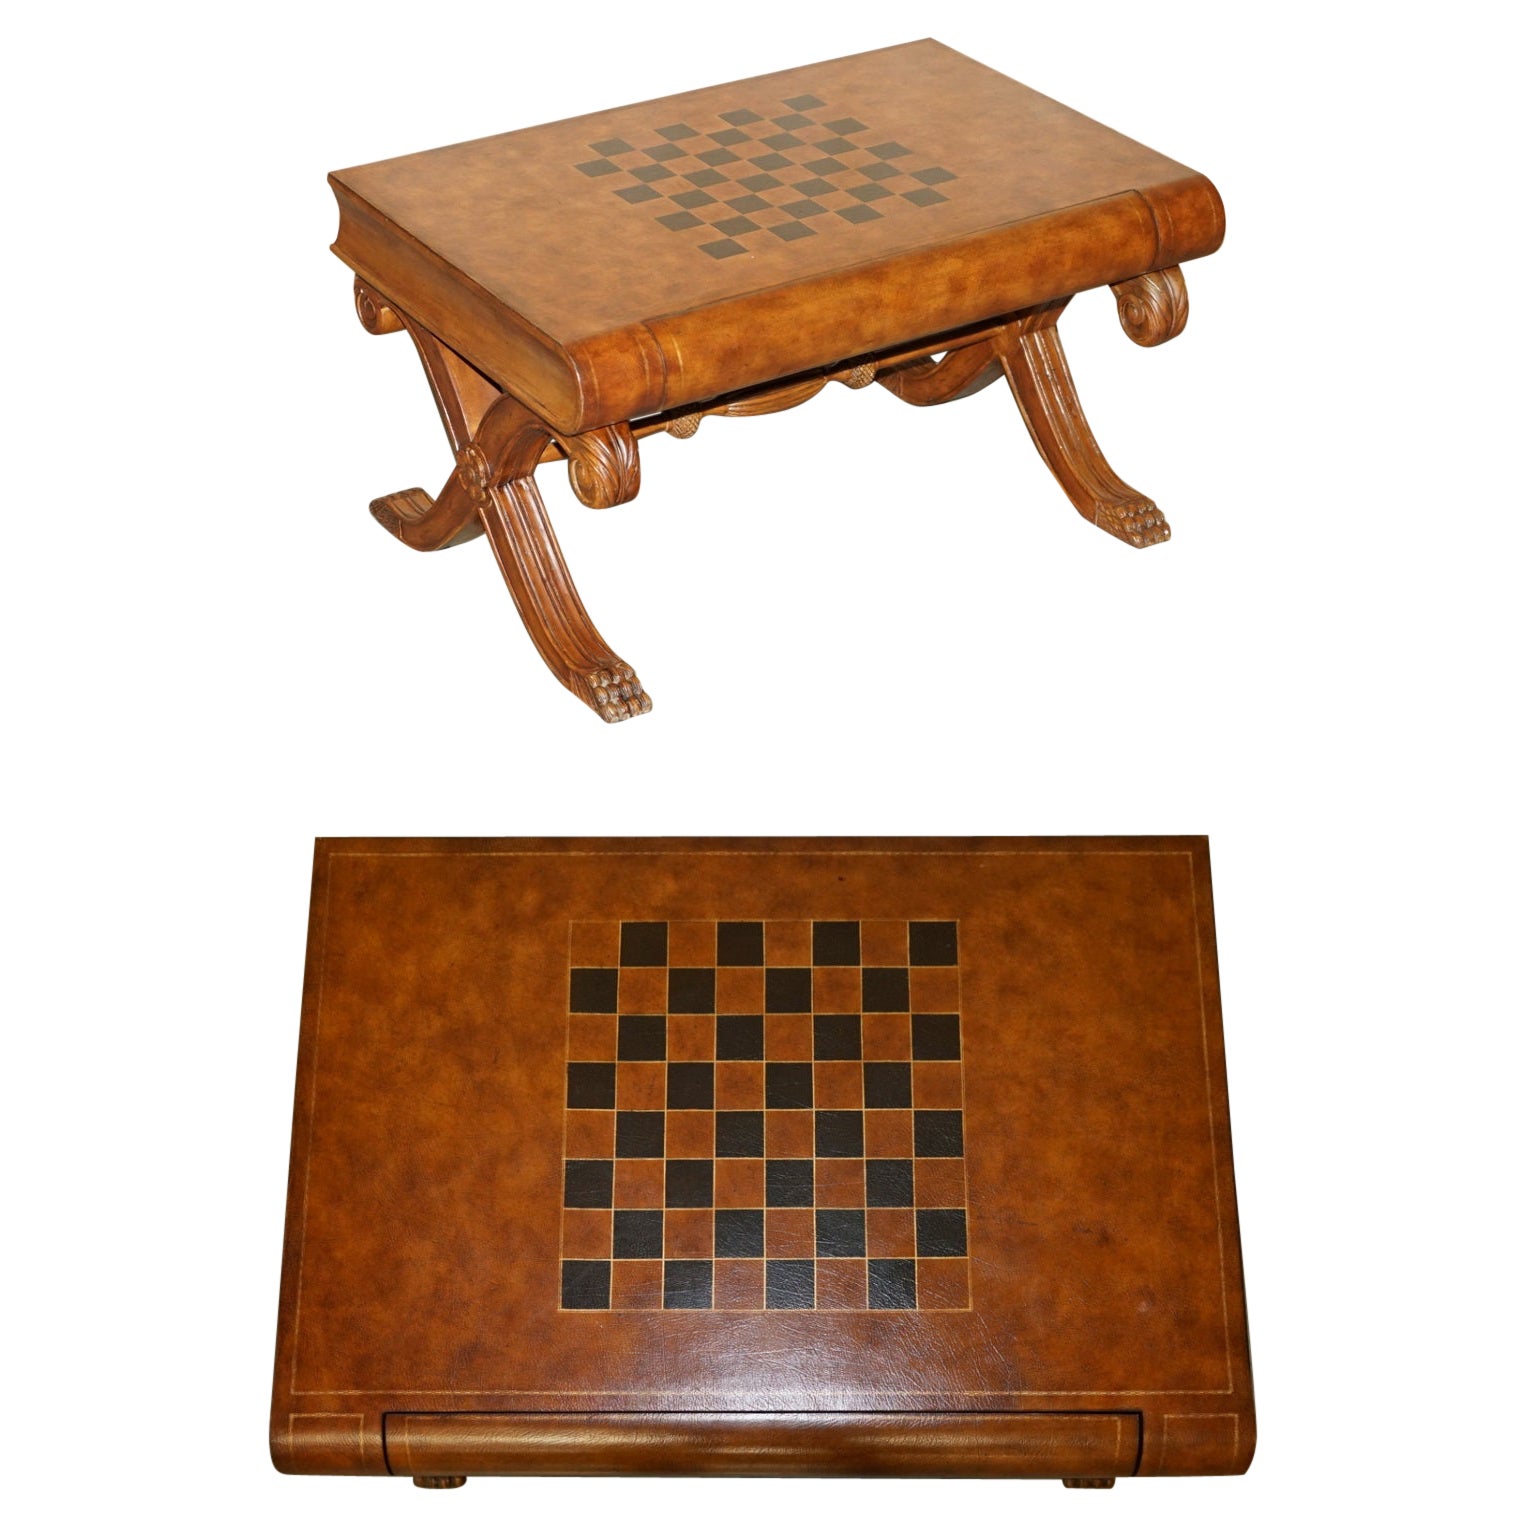 STUNNiNG HAND DYED BROWN LEATHER SCHOLARS BOOK CHESSBOARD CHESS COFFEE TABLE For Sale